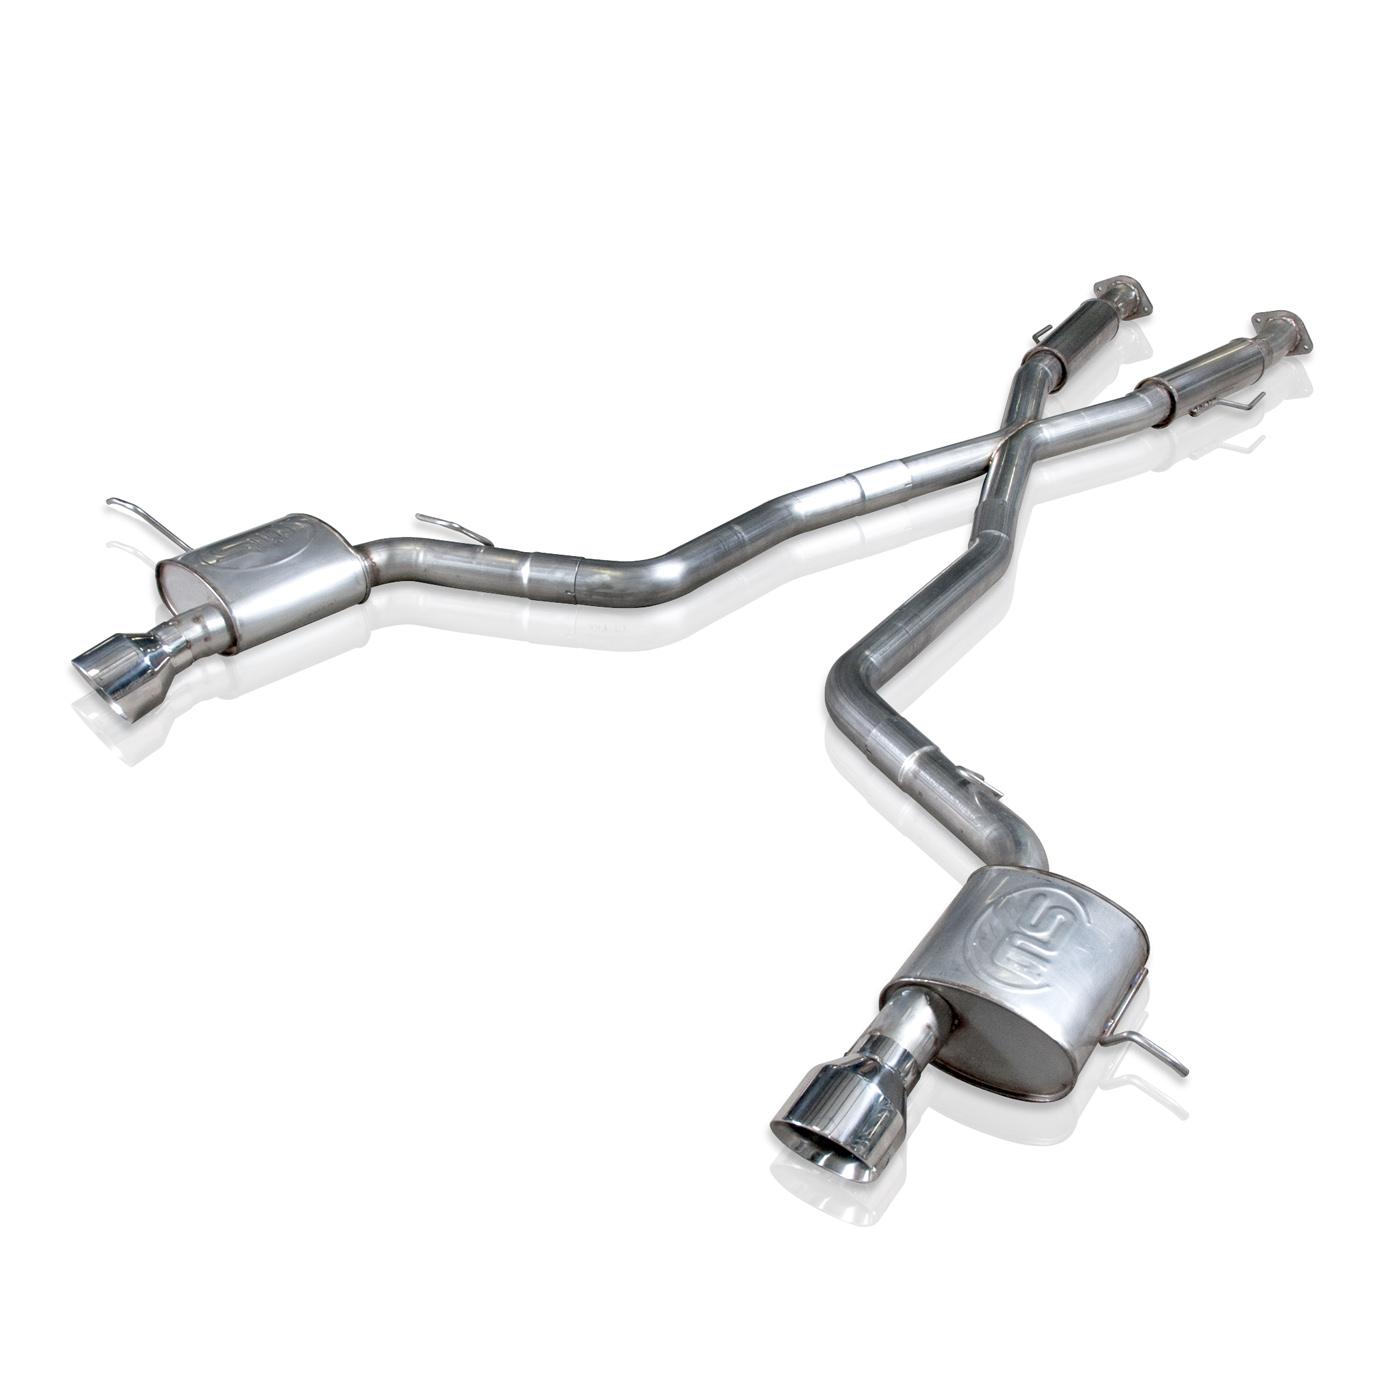 2012+ Jeep SRT8 Stainless Works Dual Chambered Exhaust System w/Turbo Mufflers & Xpipe